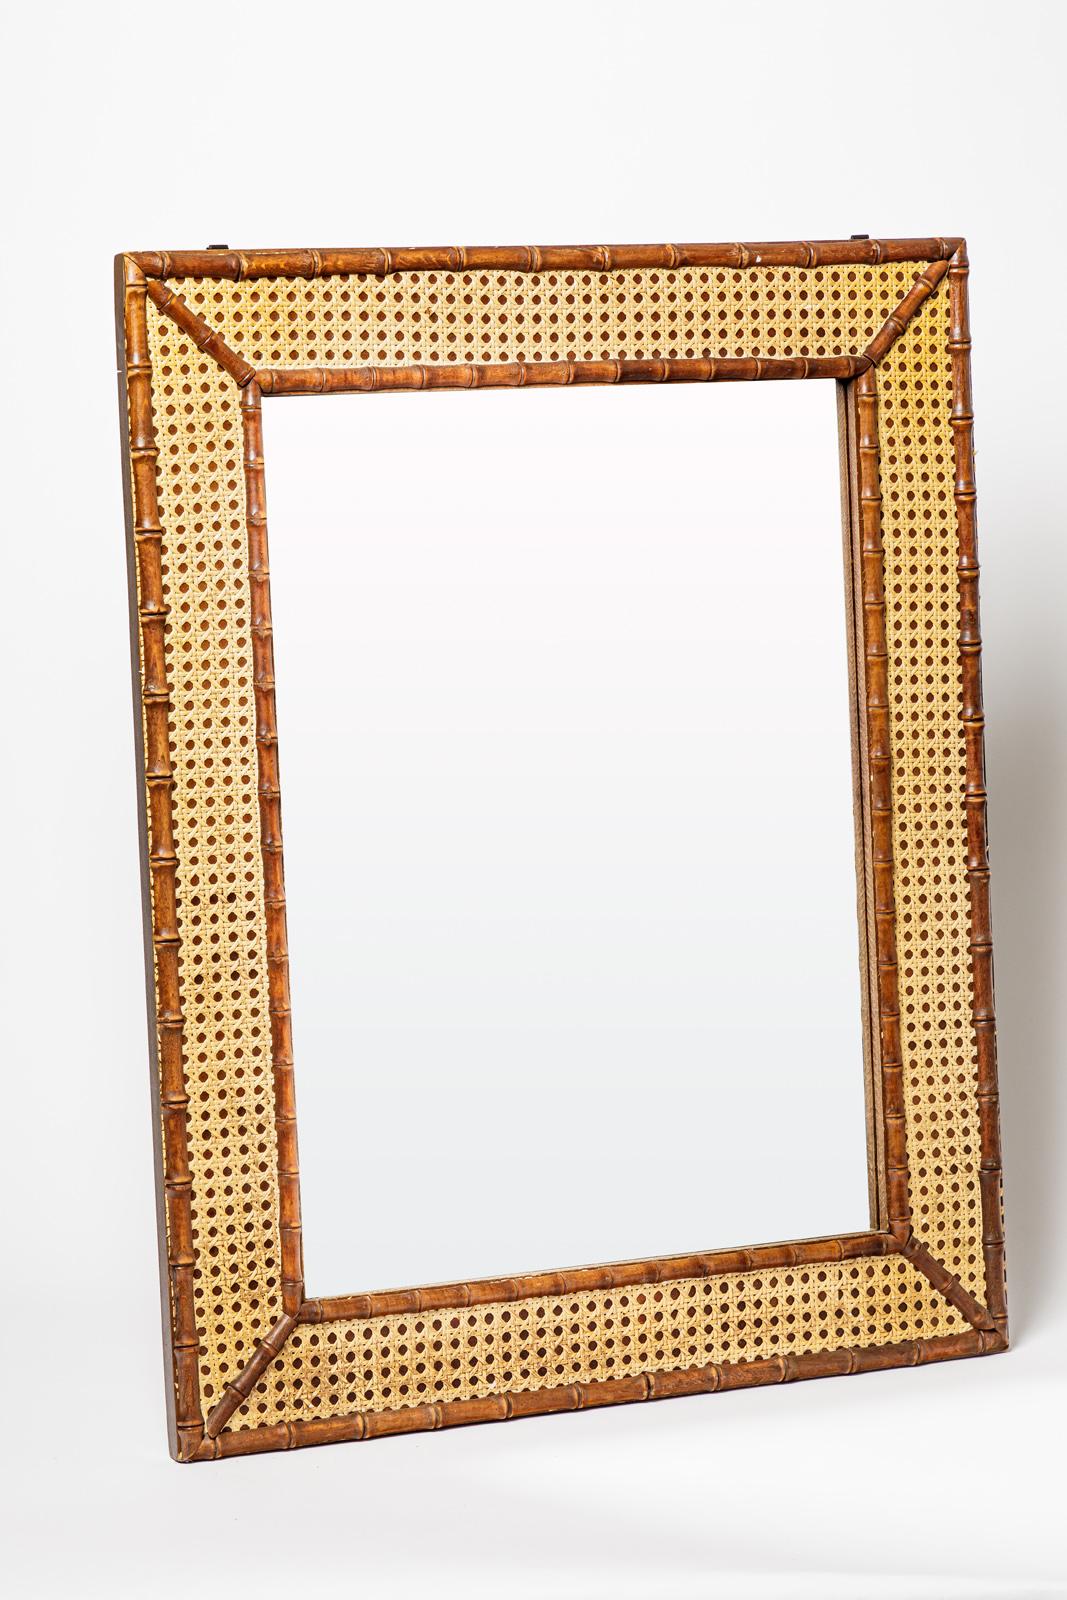 Modern 20th century design large wall mirror bamboo 1980 decoration For Sale